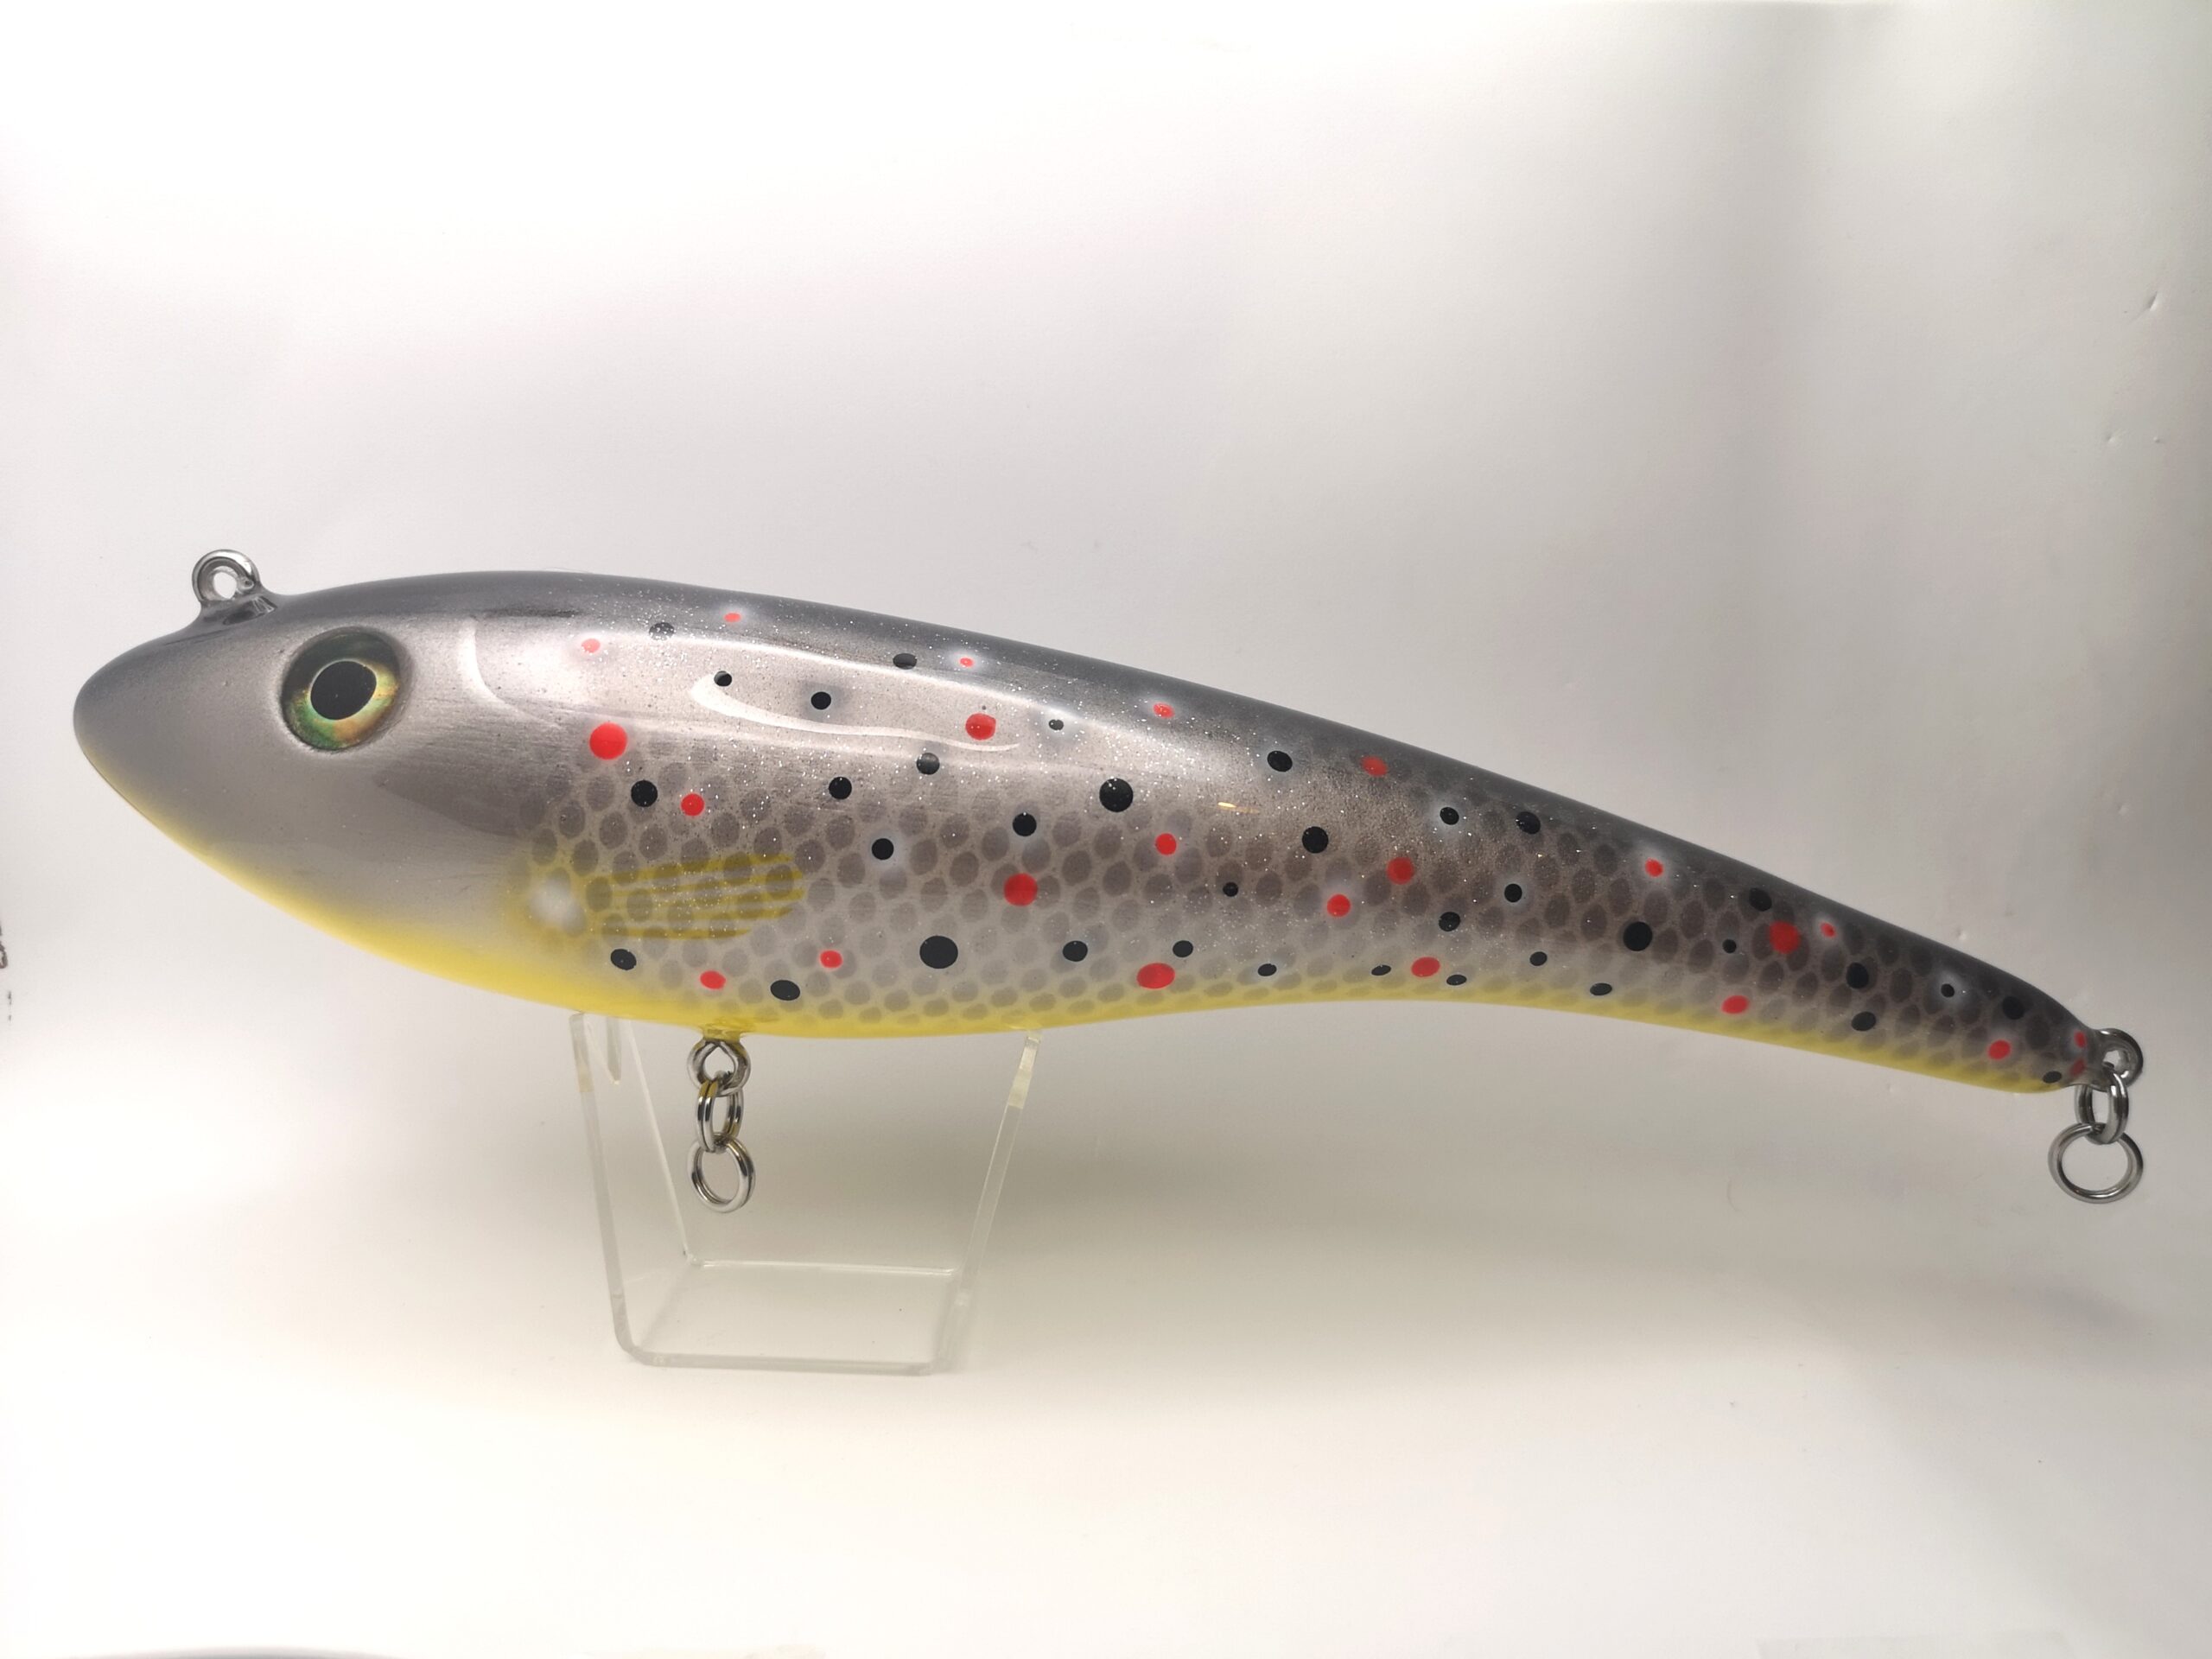 Shop – House of Lures